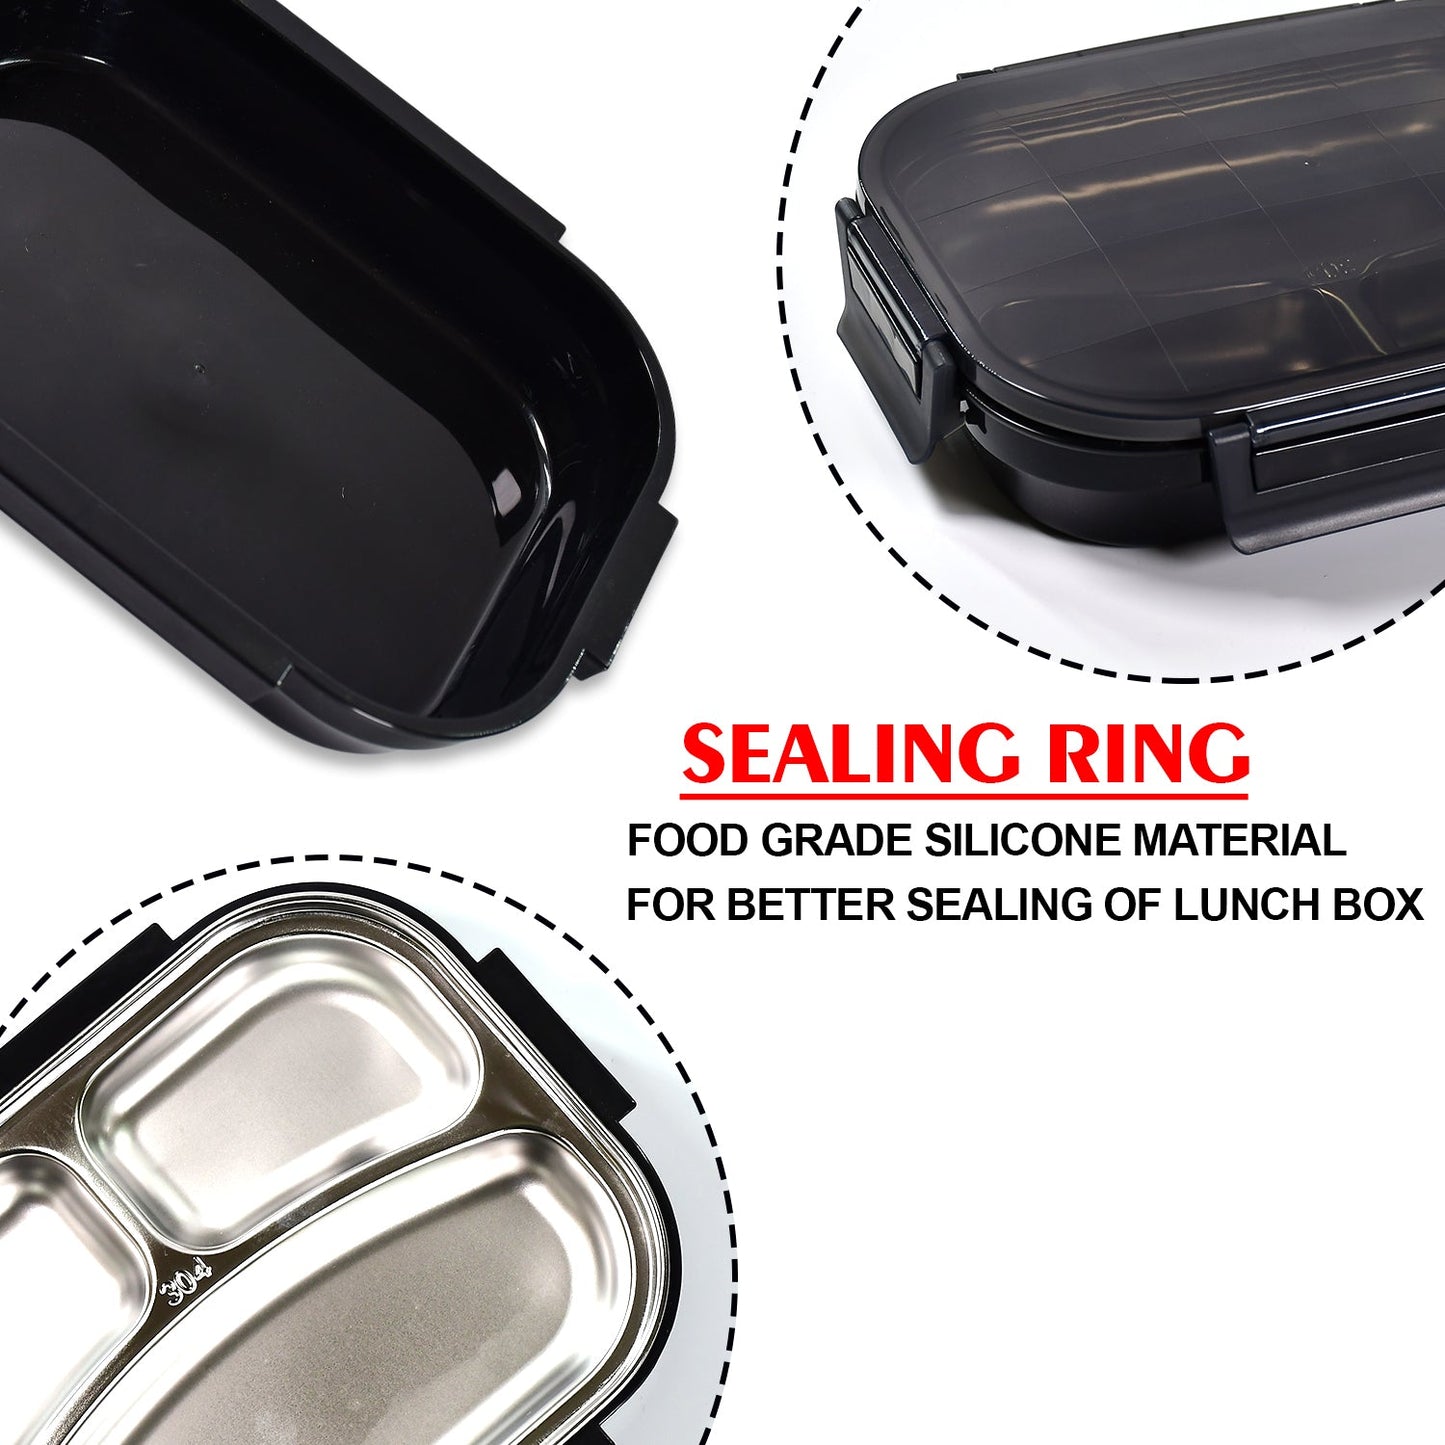 2976 Black Transparent Lunch Box for Kids and adults, Stainless Steel Lunch Box with 3 Compartments. DeoDap